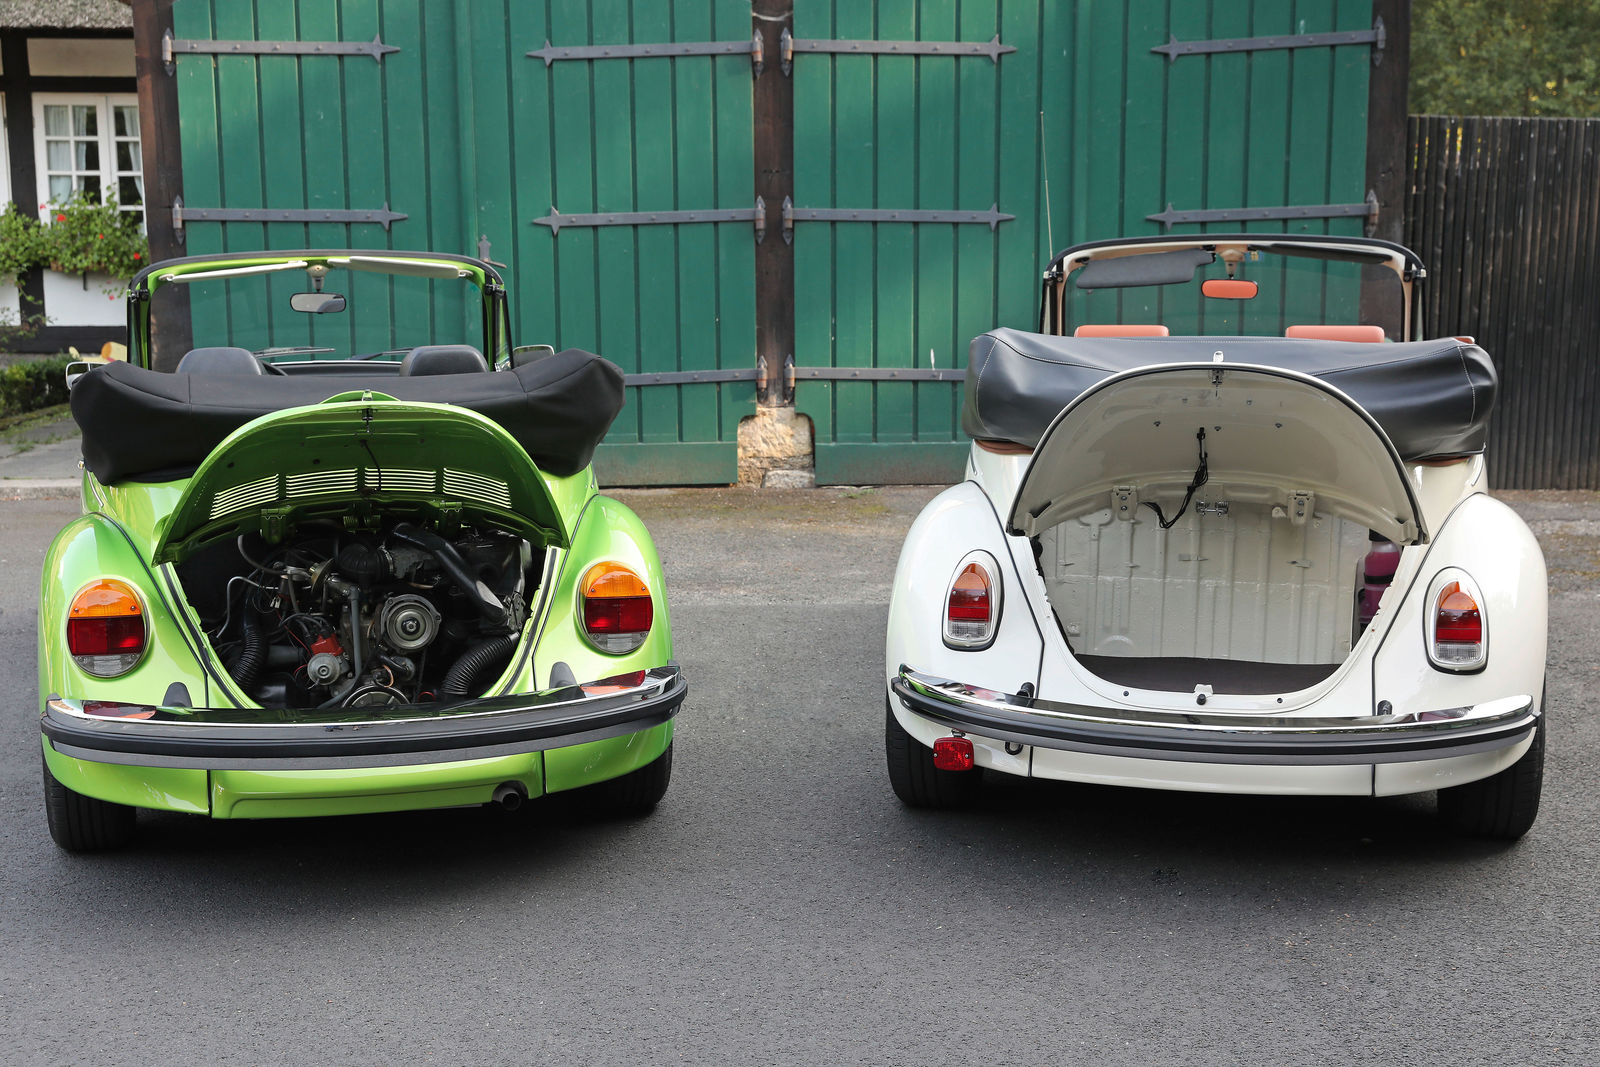 The e-Beetle is providing an additional trunk, where the classic Beetle has its boxer engine